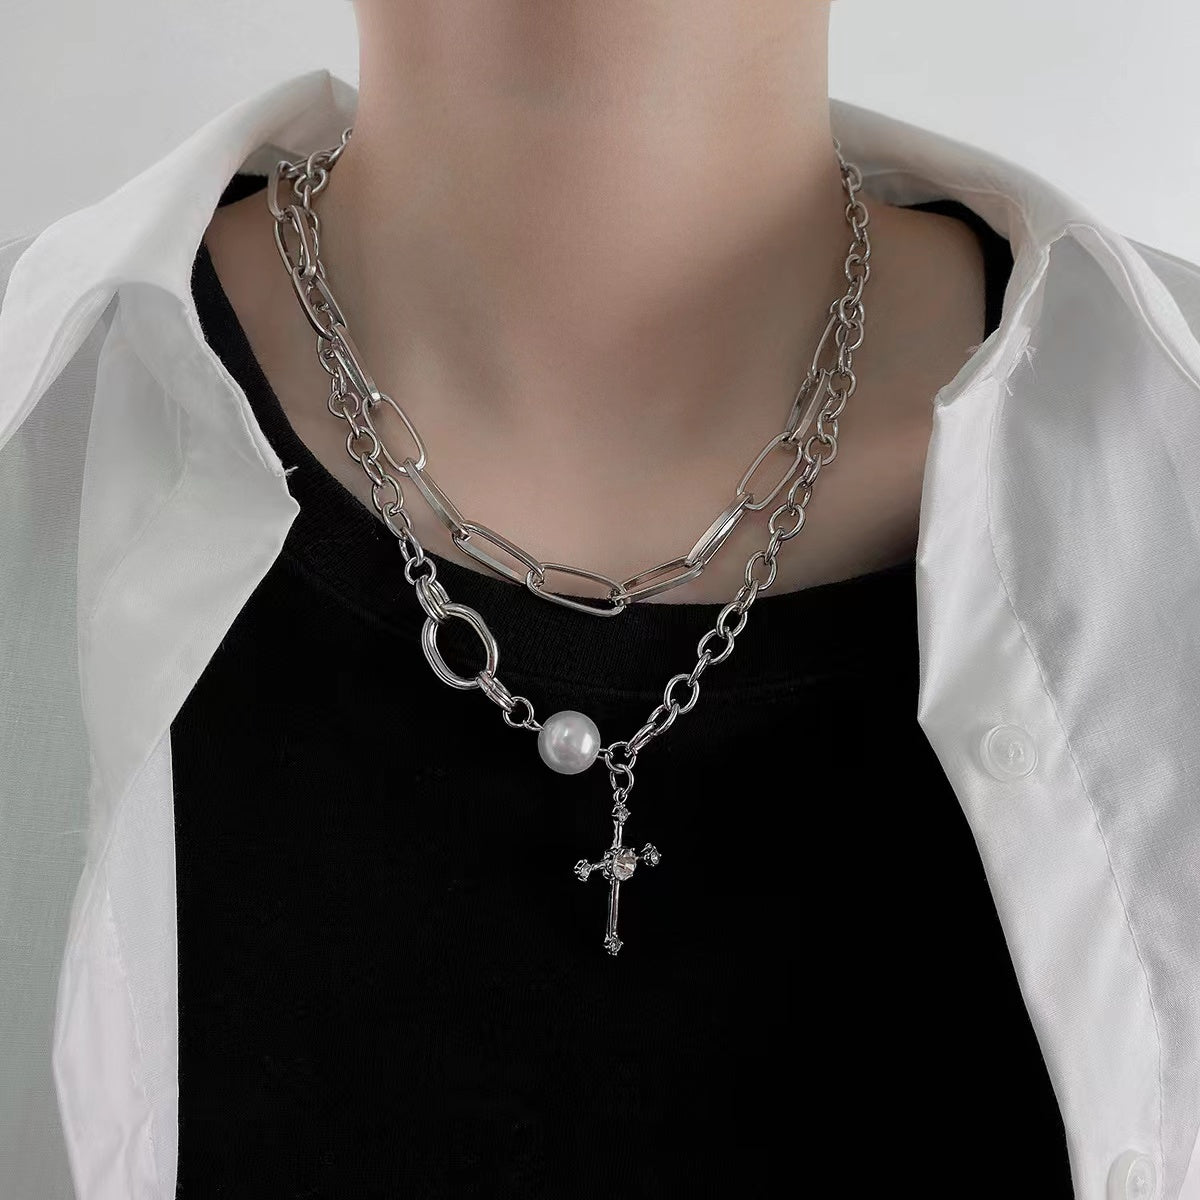 Floating Winds Cross Pendant Necklace